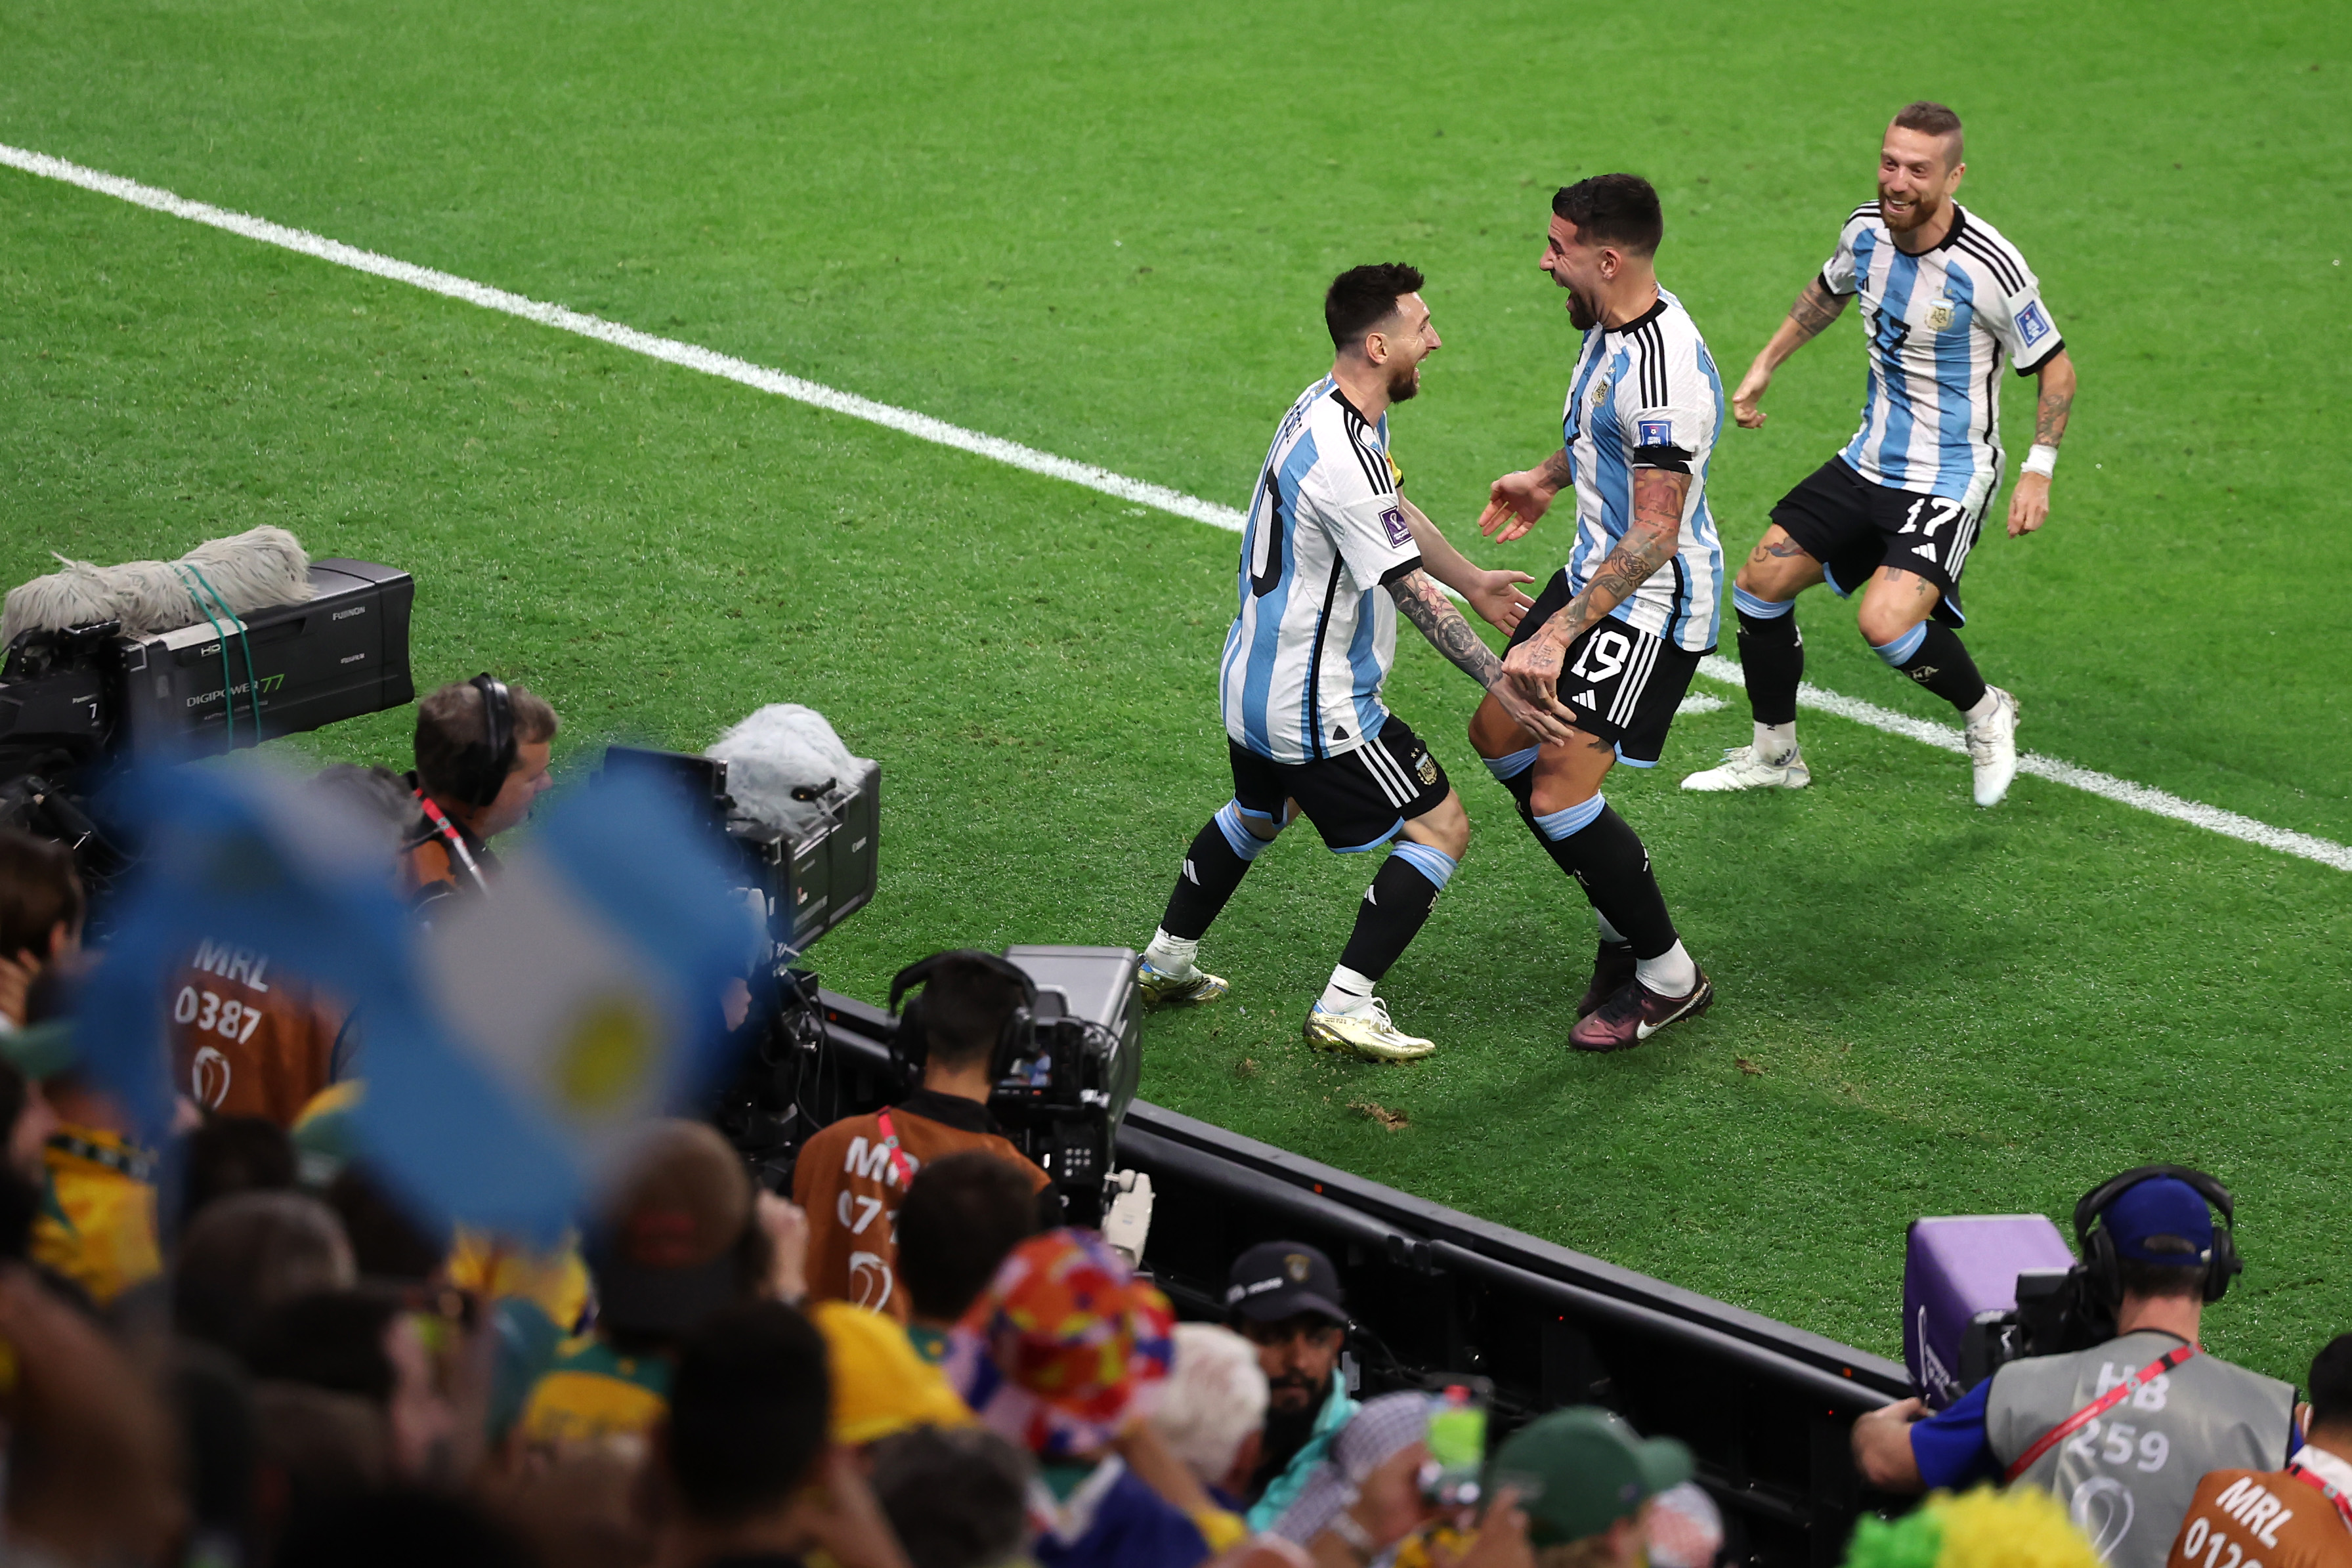 Lionel Messi of Argentina celebrates with teammates after scoring the team's first goal against Australia at Ahmad bin Ali Stadium in Al Rayyan, Qatar on December 3.